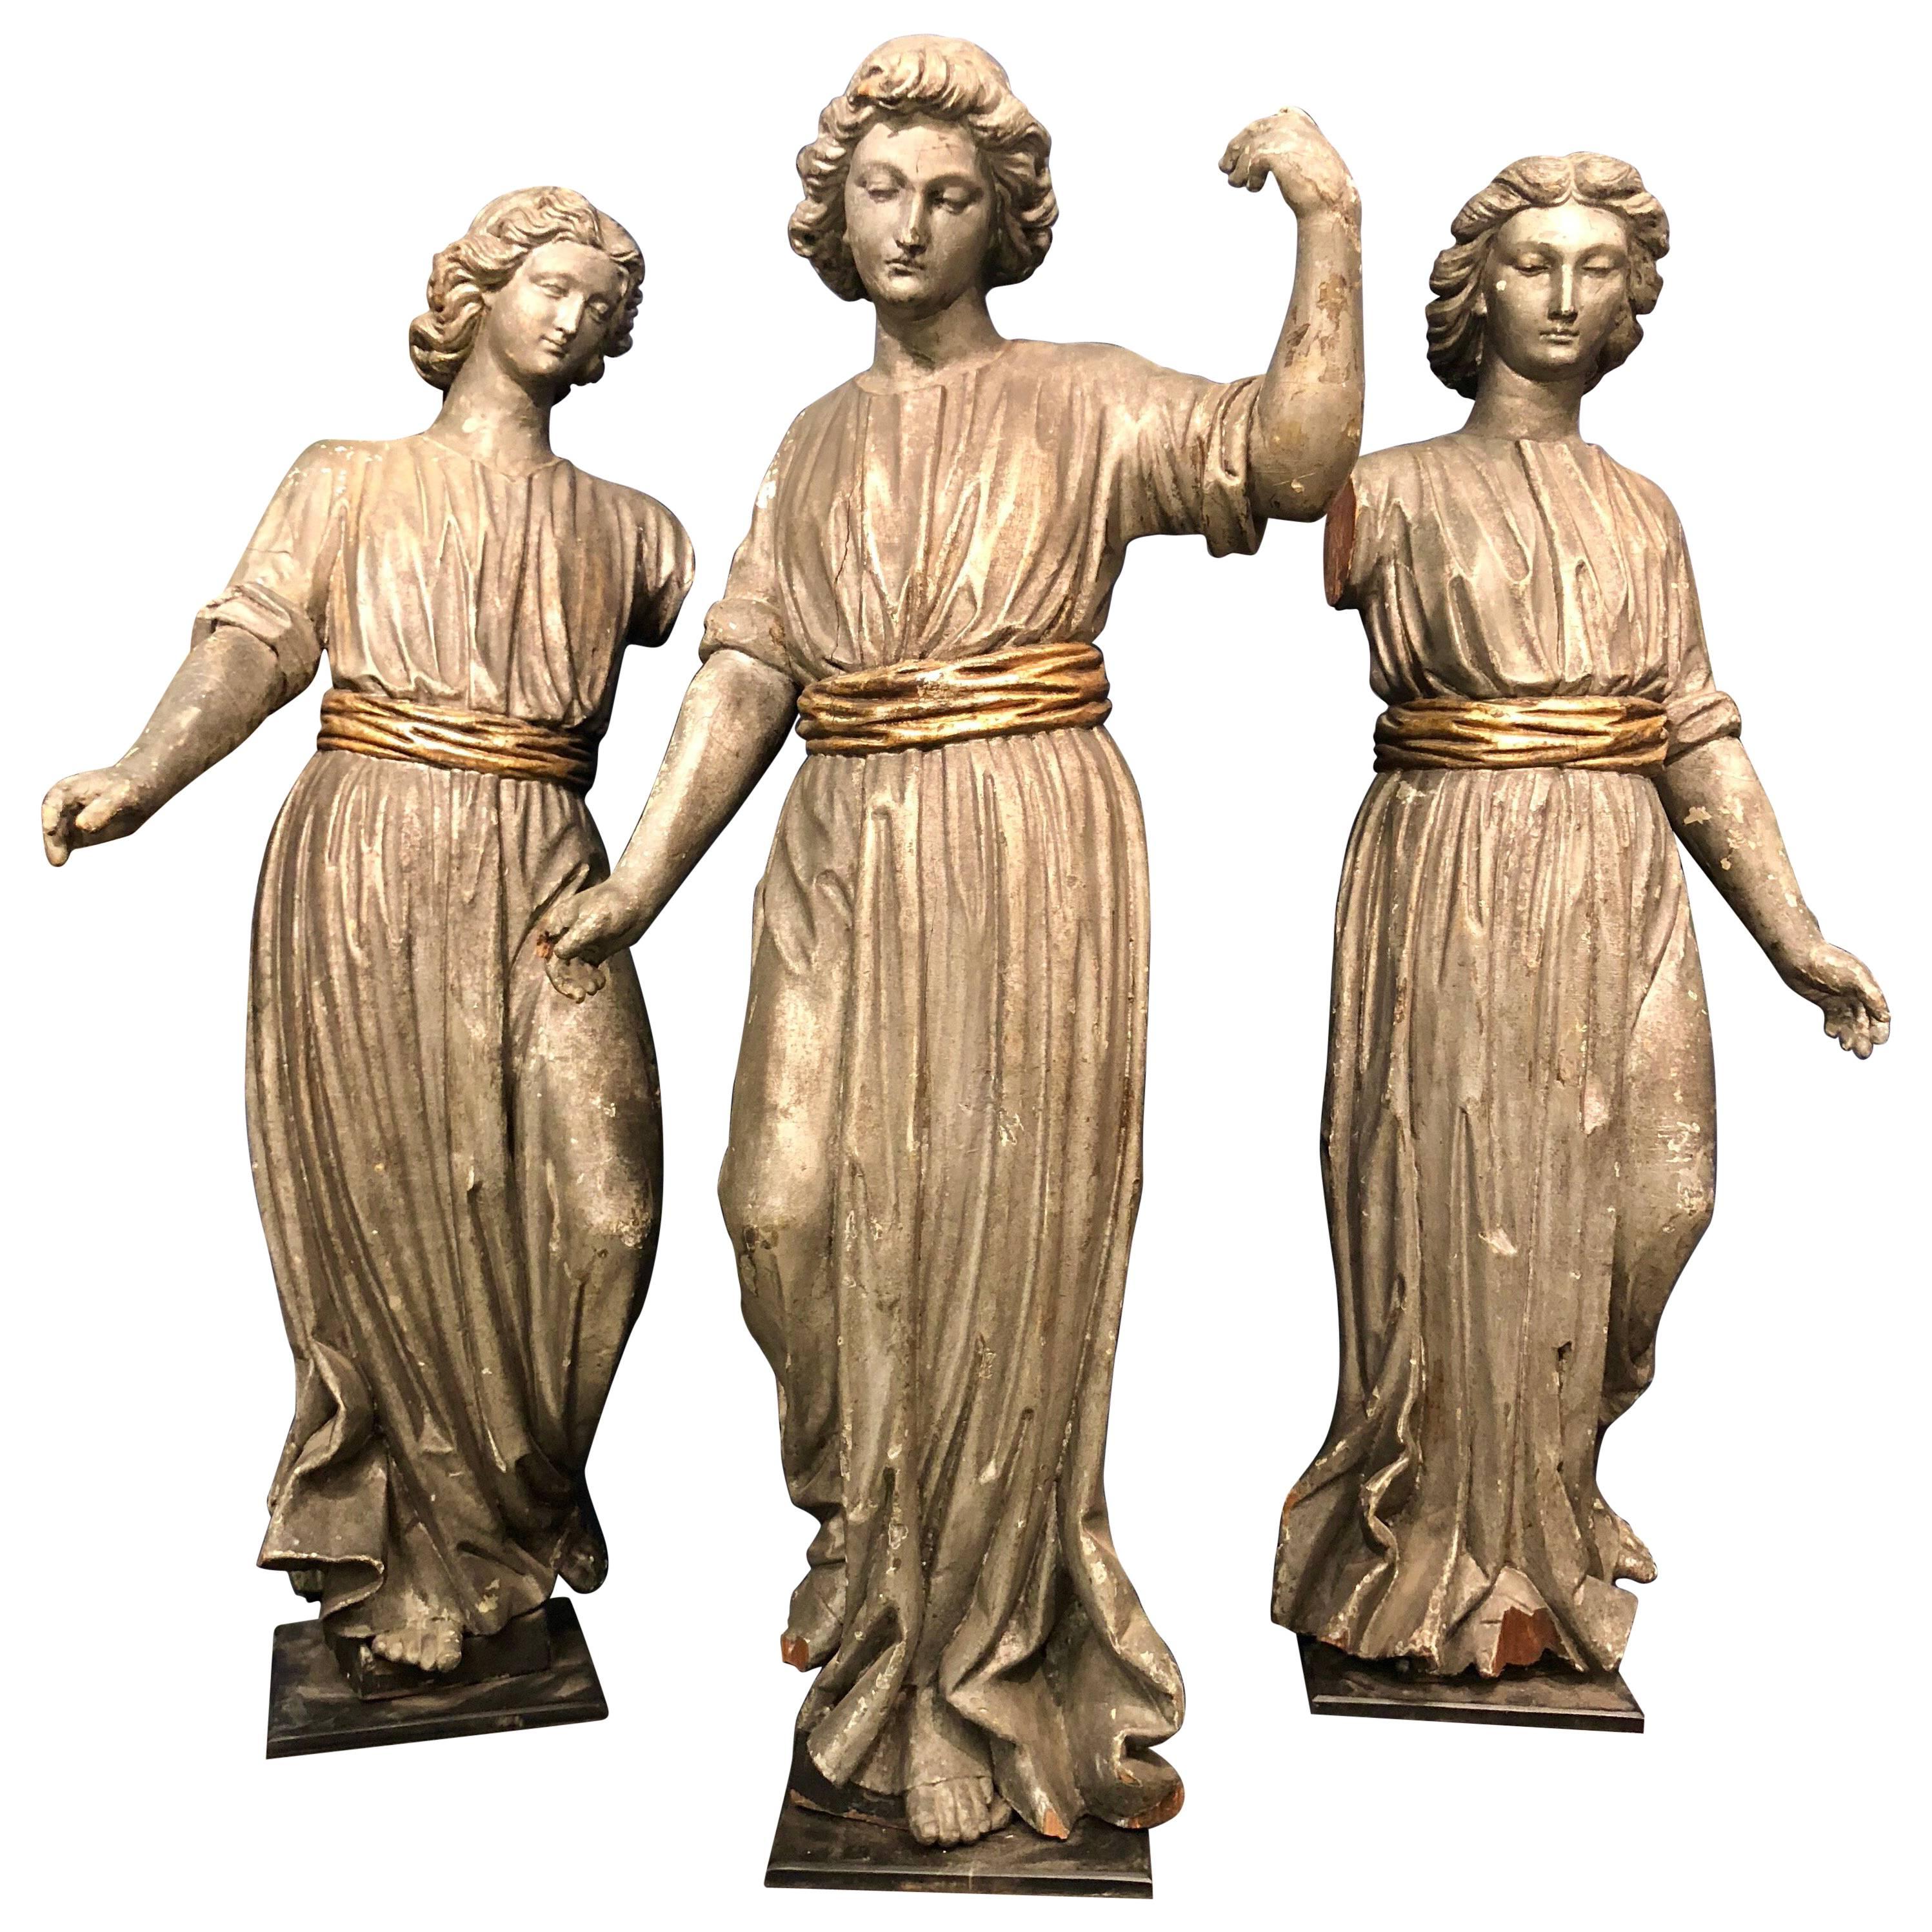 Rare Set of Three Carved and Painted Muses Early 19th Century 